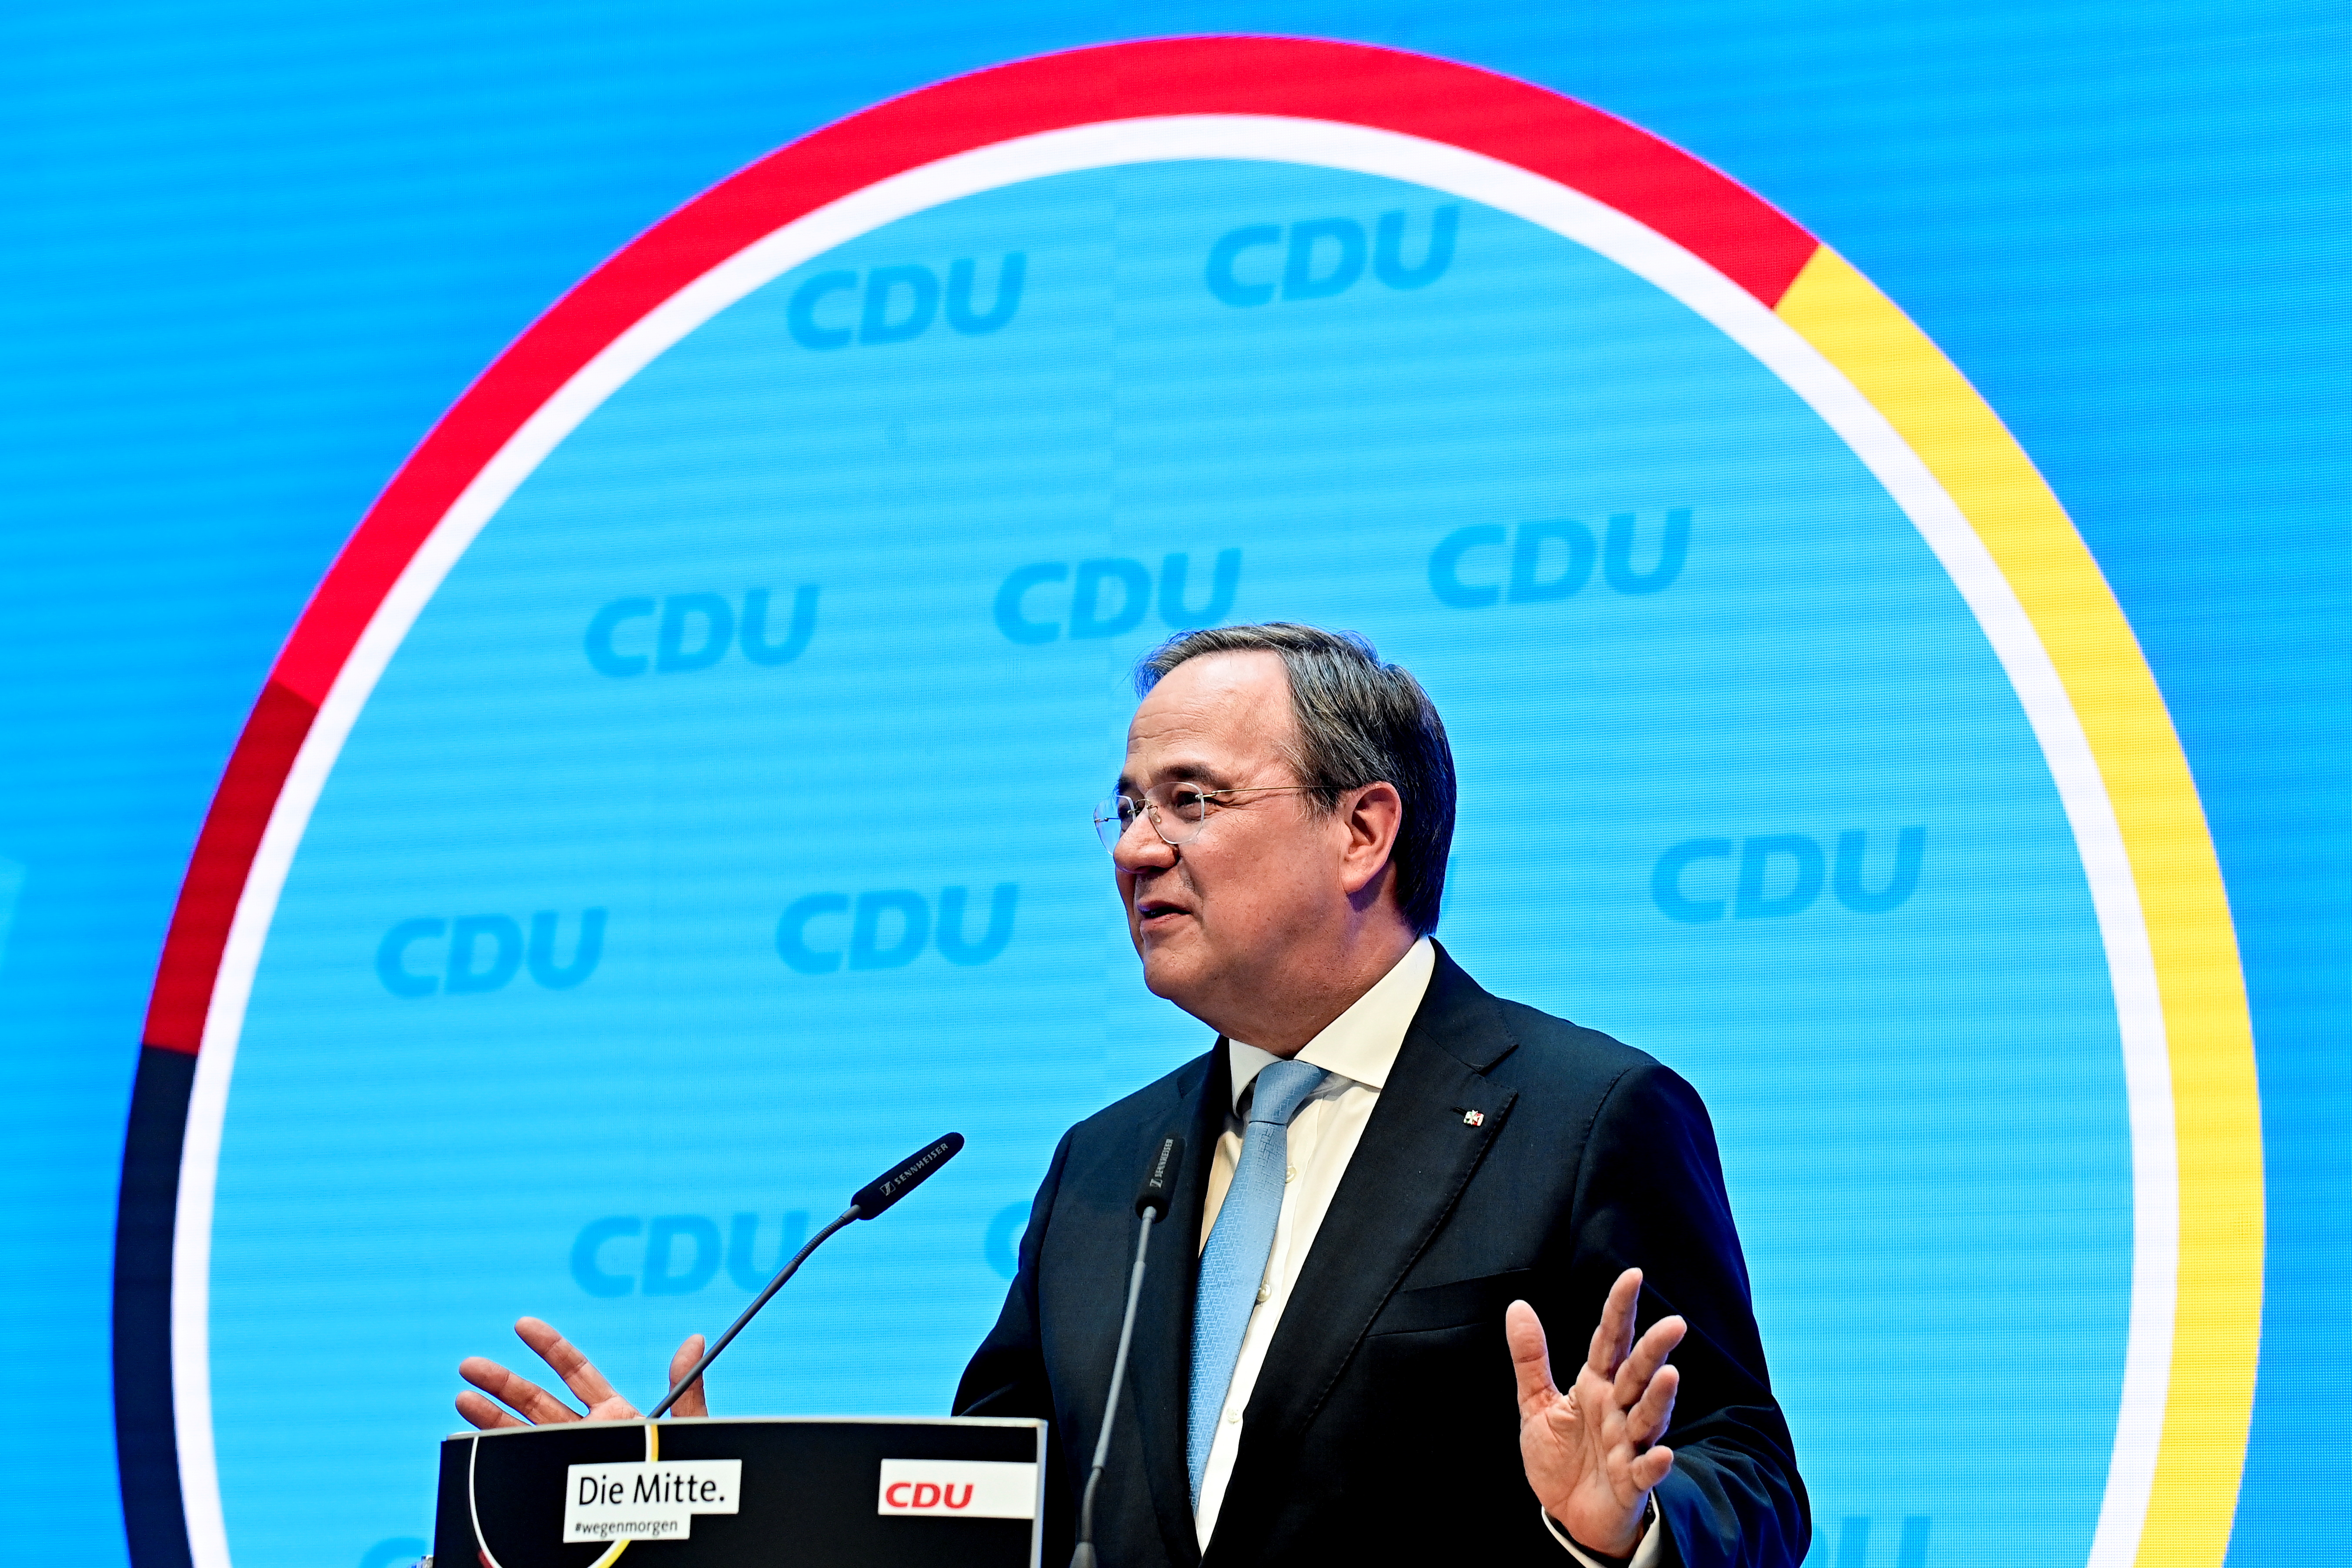 North Rhine-Westphalia's State Premier and head of Christian Democratic Union (CDU) party Armin Laschet gives a news conference at the CDU headquarters in Berlin, Germany April 20, 2021.  Tobias Schwarz/Pool via REUTERS/File Photo